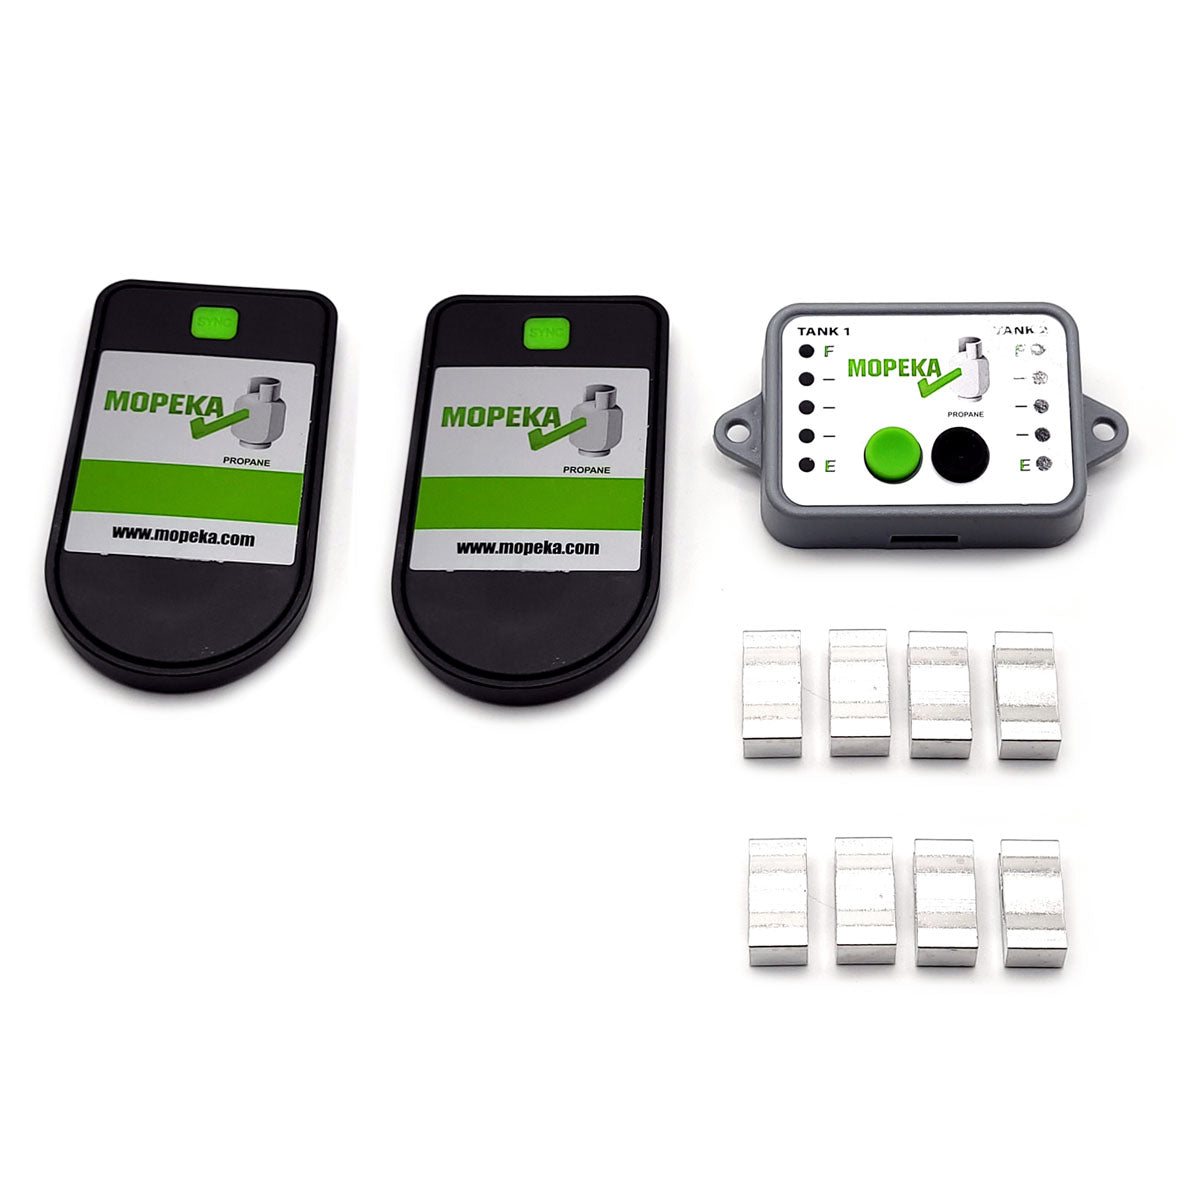 Two Mopeka Tank Fuel Level Indicator Set with Bluetooth Receiver LP Sensor to Measure Propane Levels